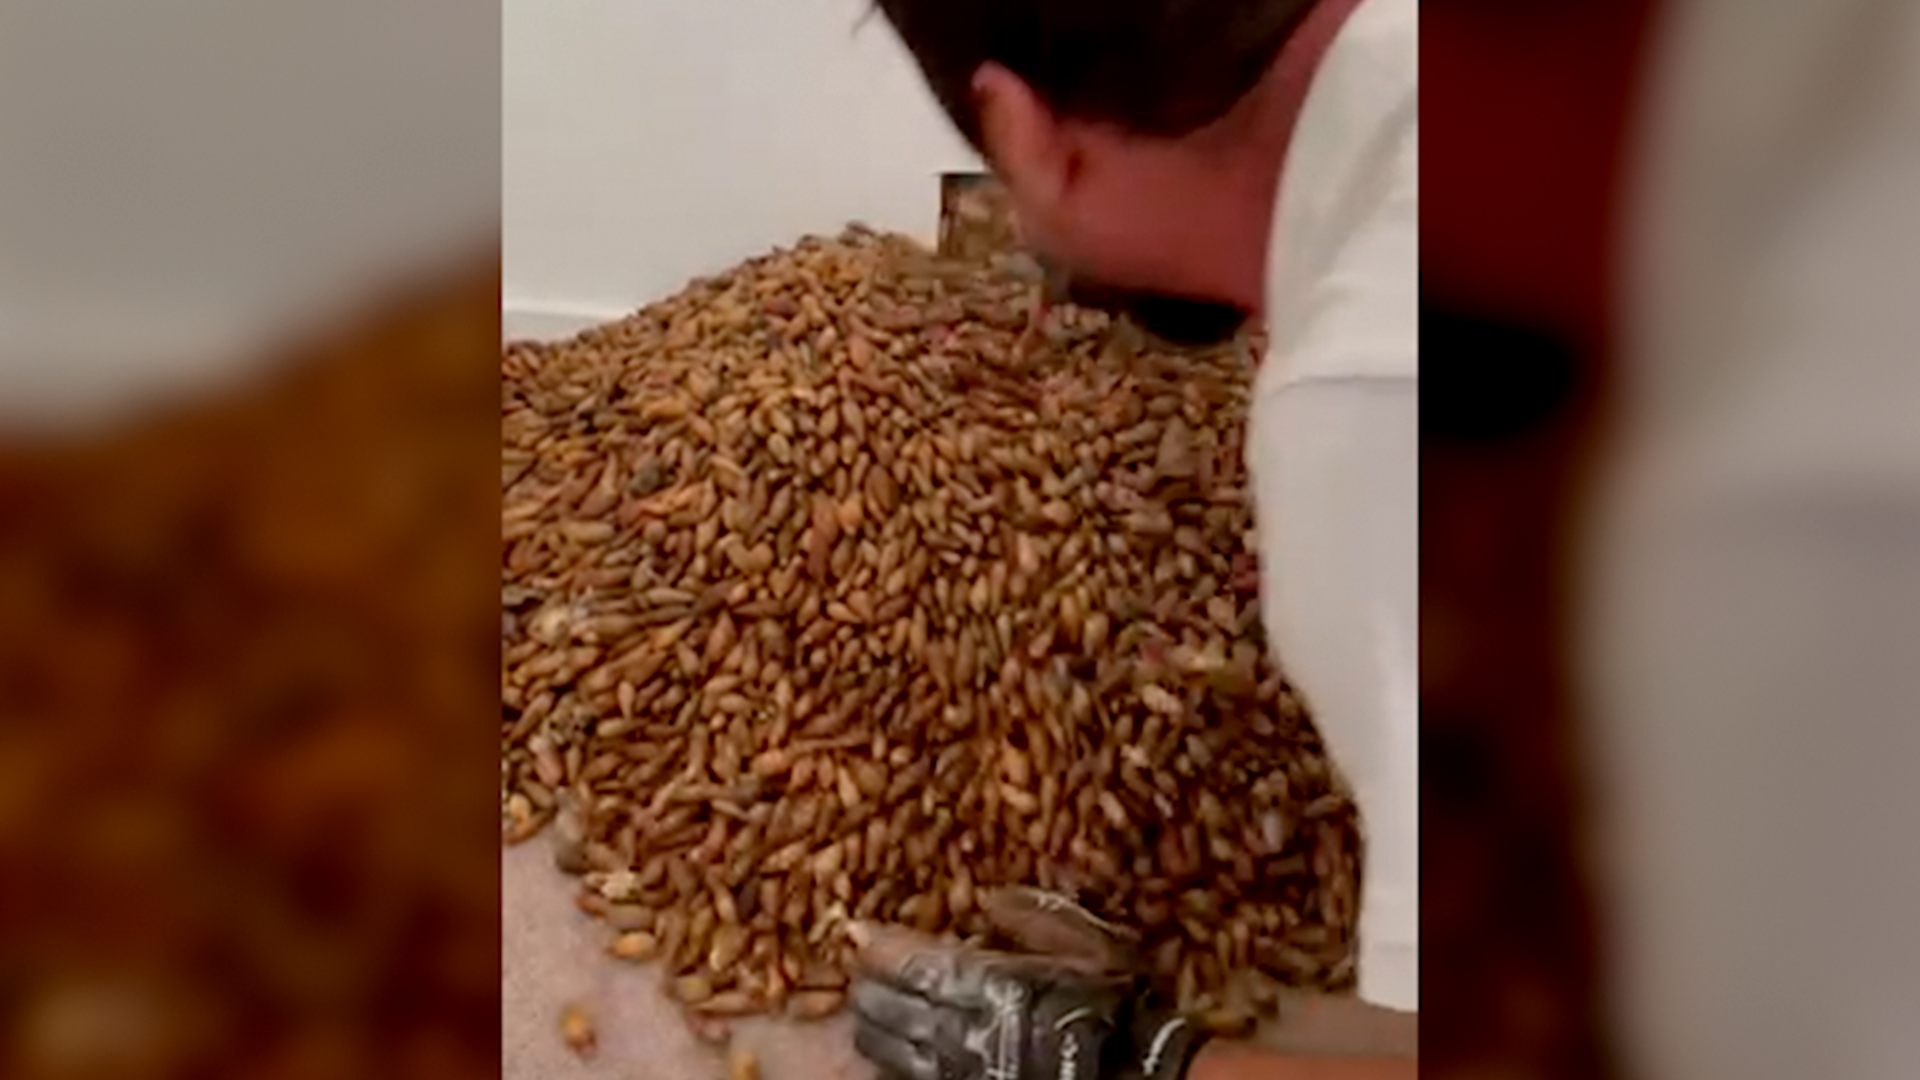 700 pounds of acorns found in California home (video) - Boing Boing